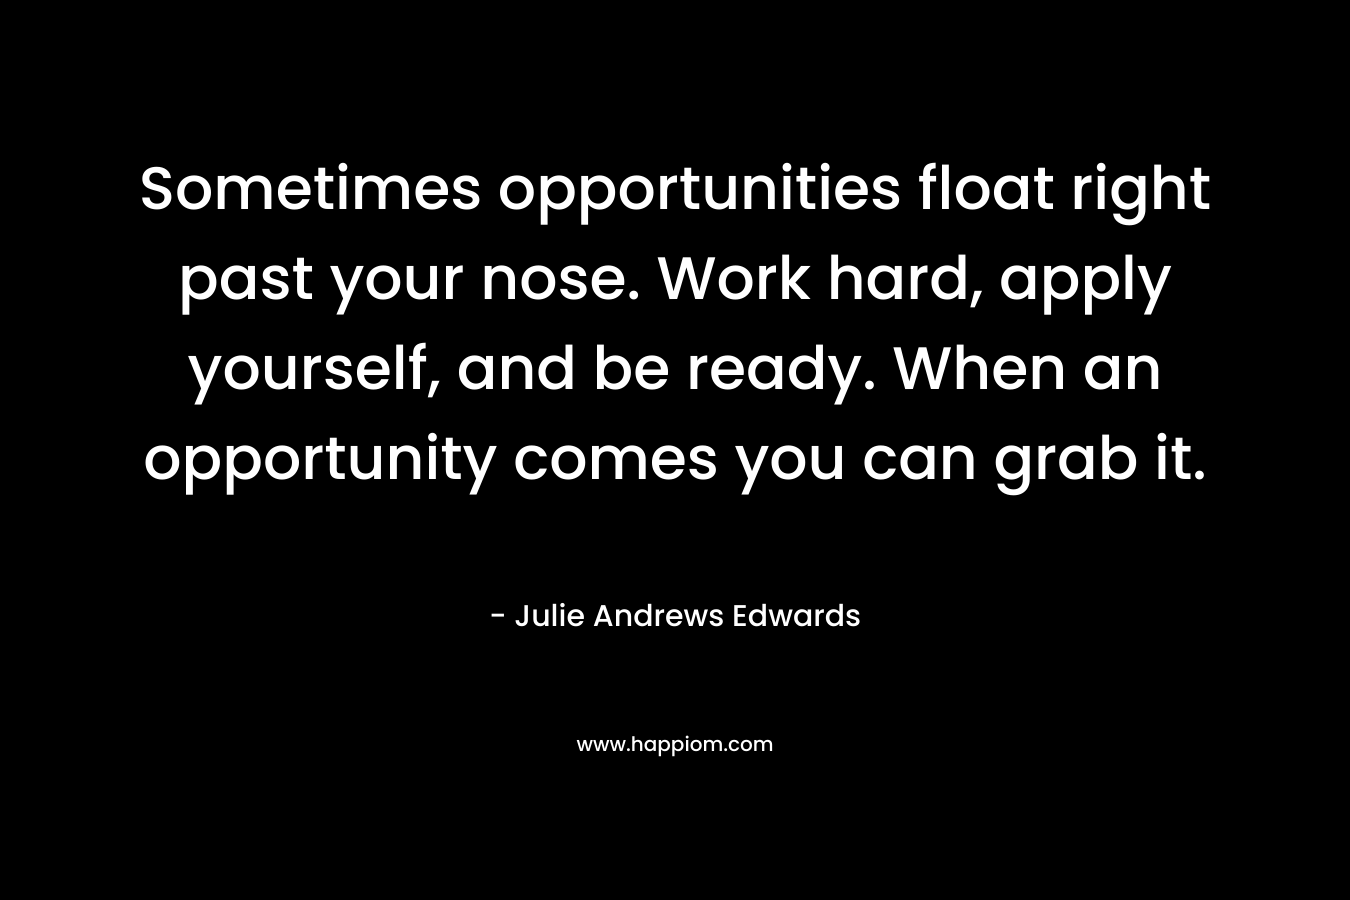 Sometimes opportunities float right past your nose. Work hard, apply yourself, and be ready. When an opportunity comes you can grab it. – Julie Andrews Edwards